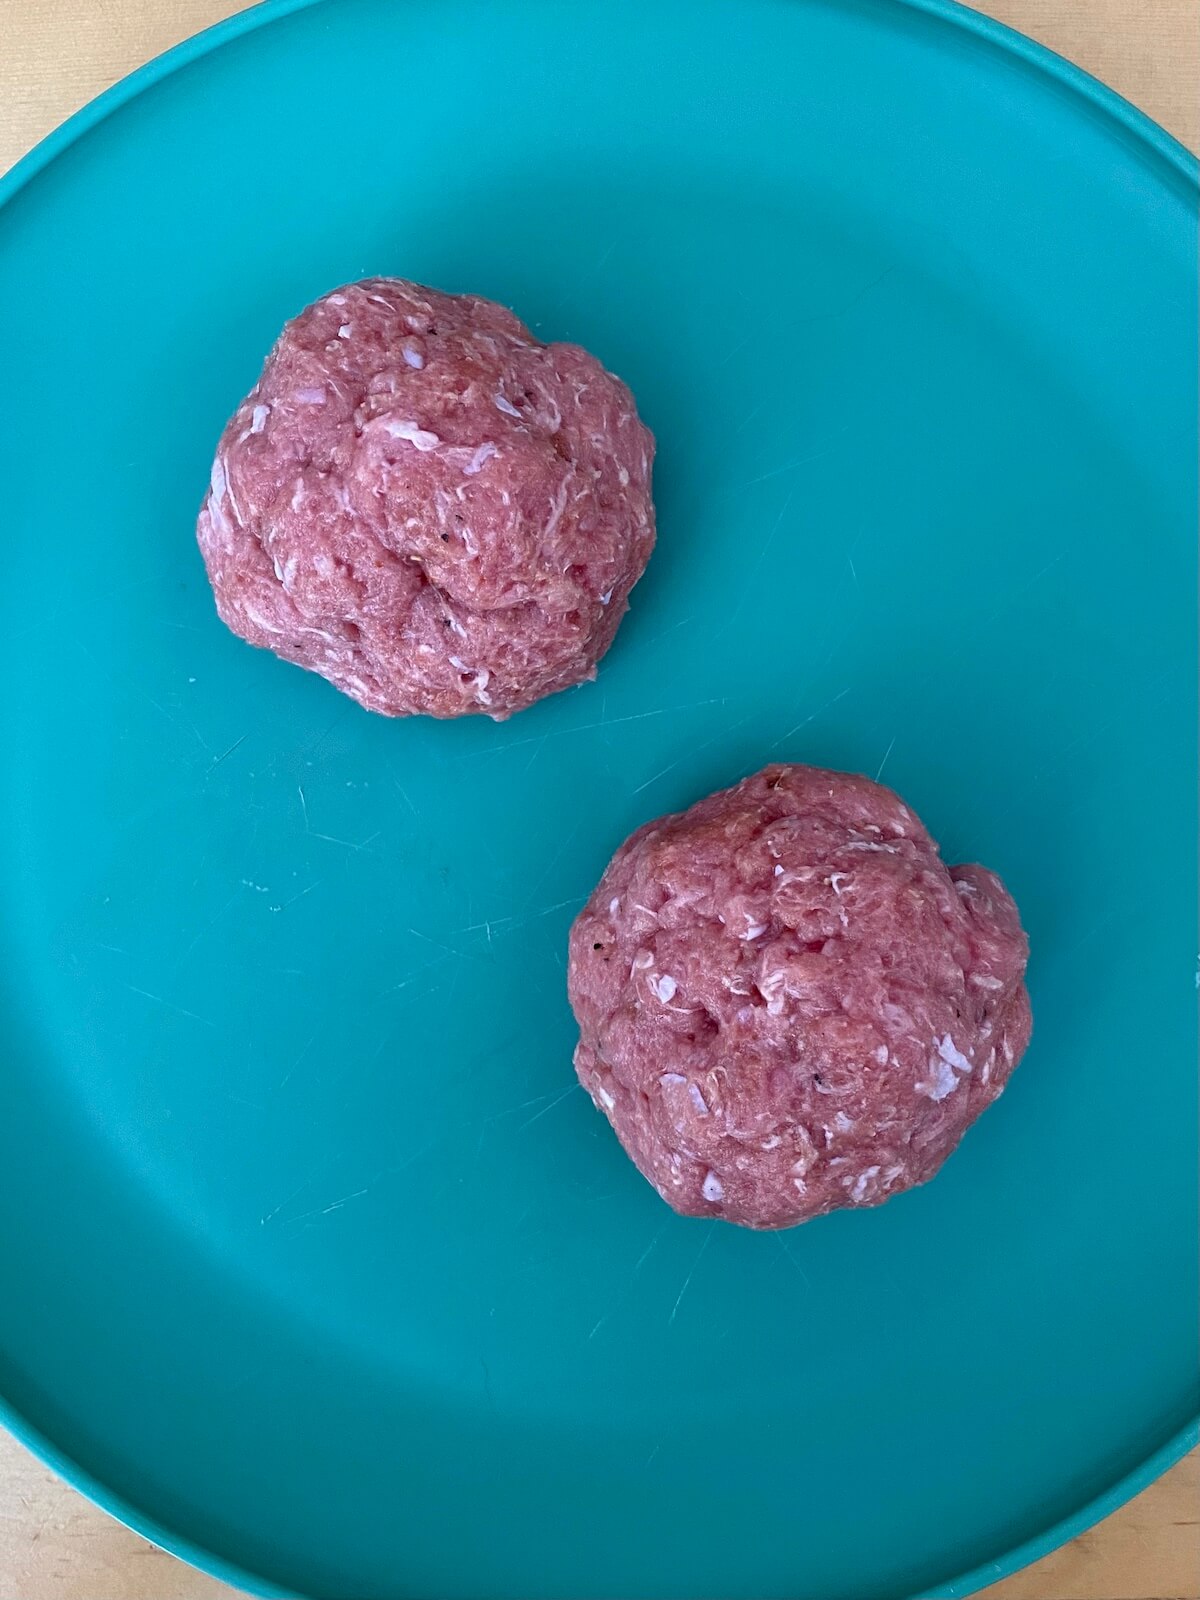 Two formed turkey burger balls on a green plate.